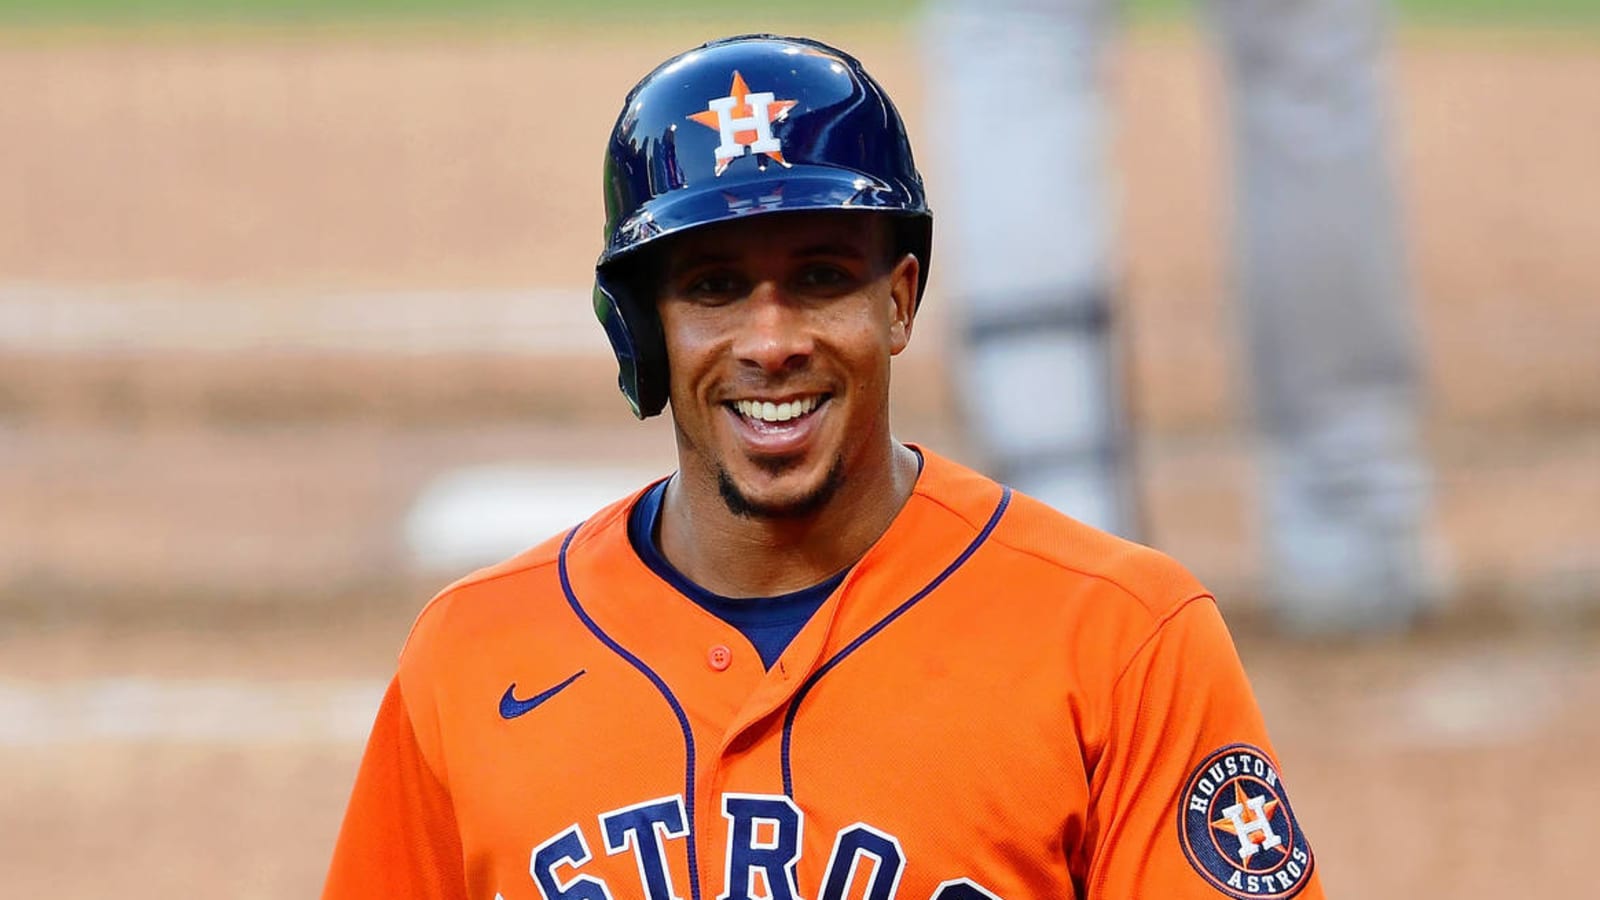 Michael Brantley returning to Astros on two-year, $32M deal